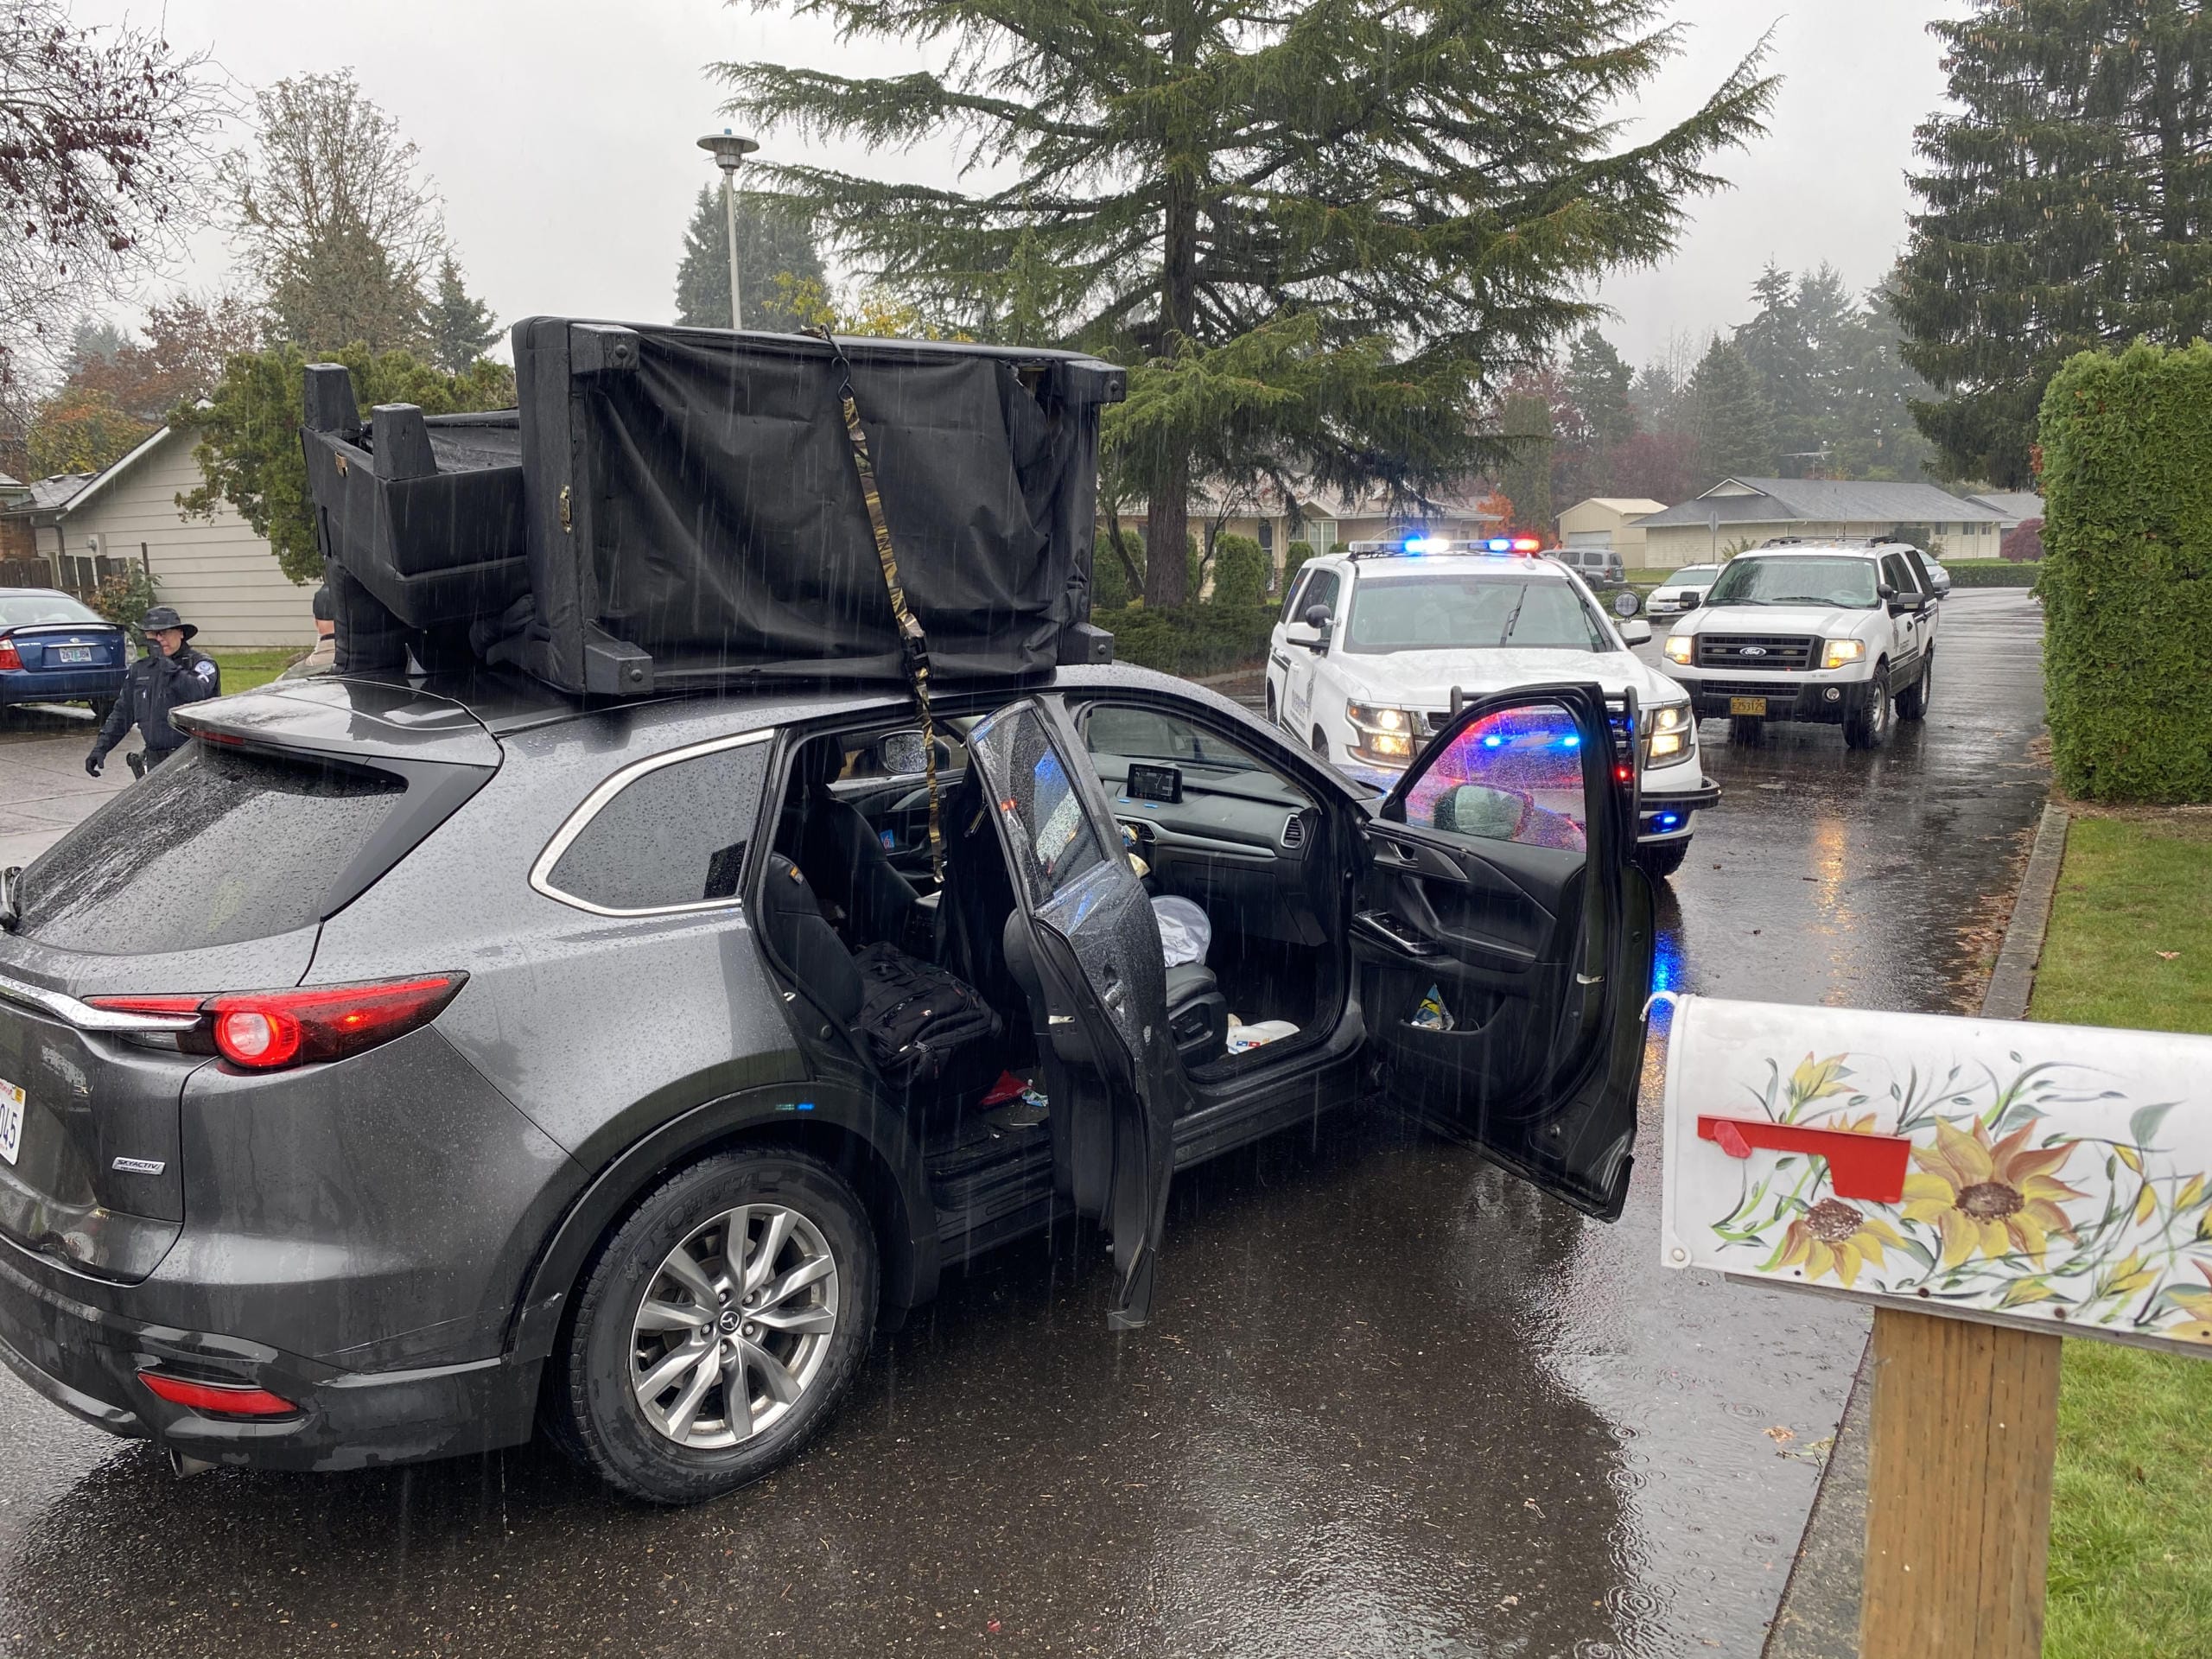 An Oregon man was arrested Tuesday after allegedly robbing a hardware store in Happy Valley, Ore., and then leading law enforcement on a chase into Vancouver with a large sofa strapped to the top of the getaway vehicle.